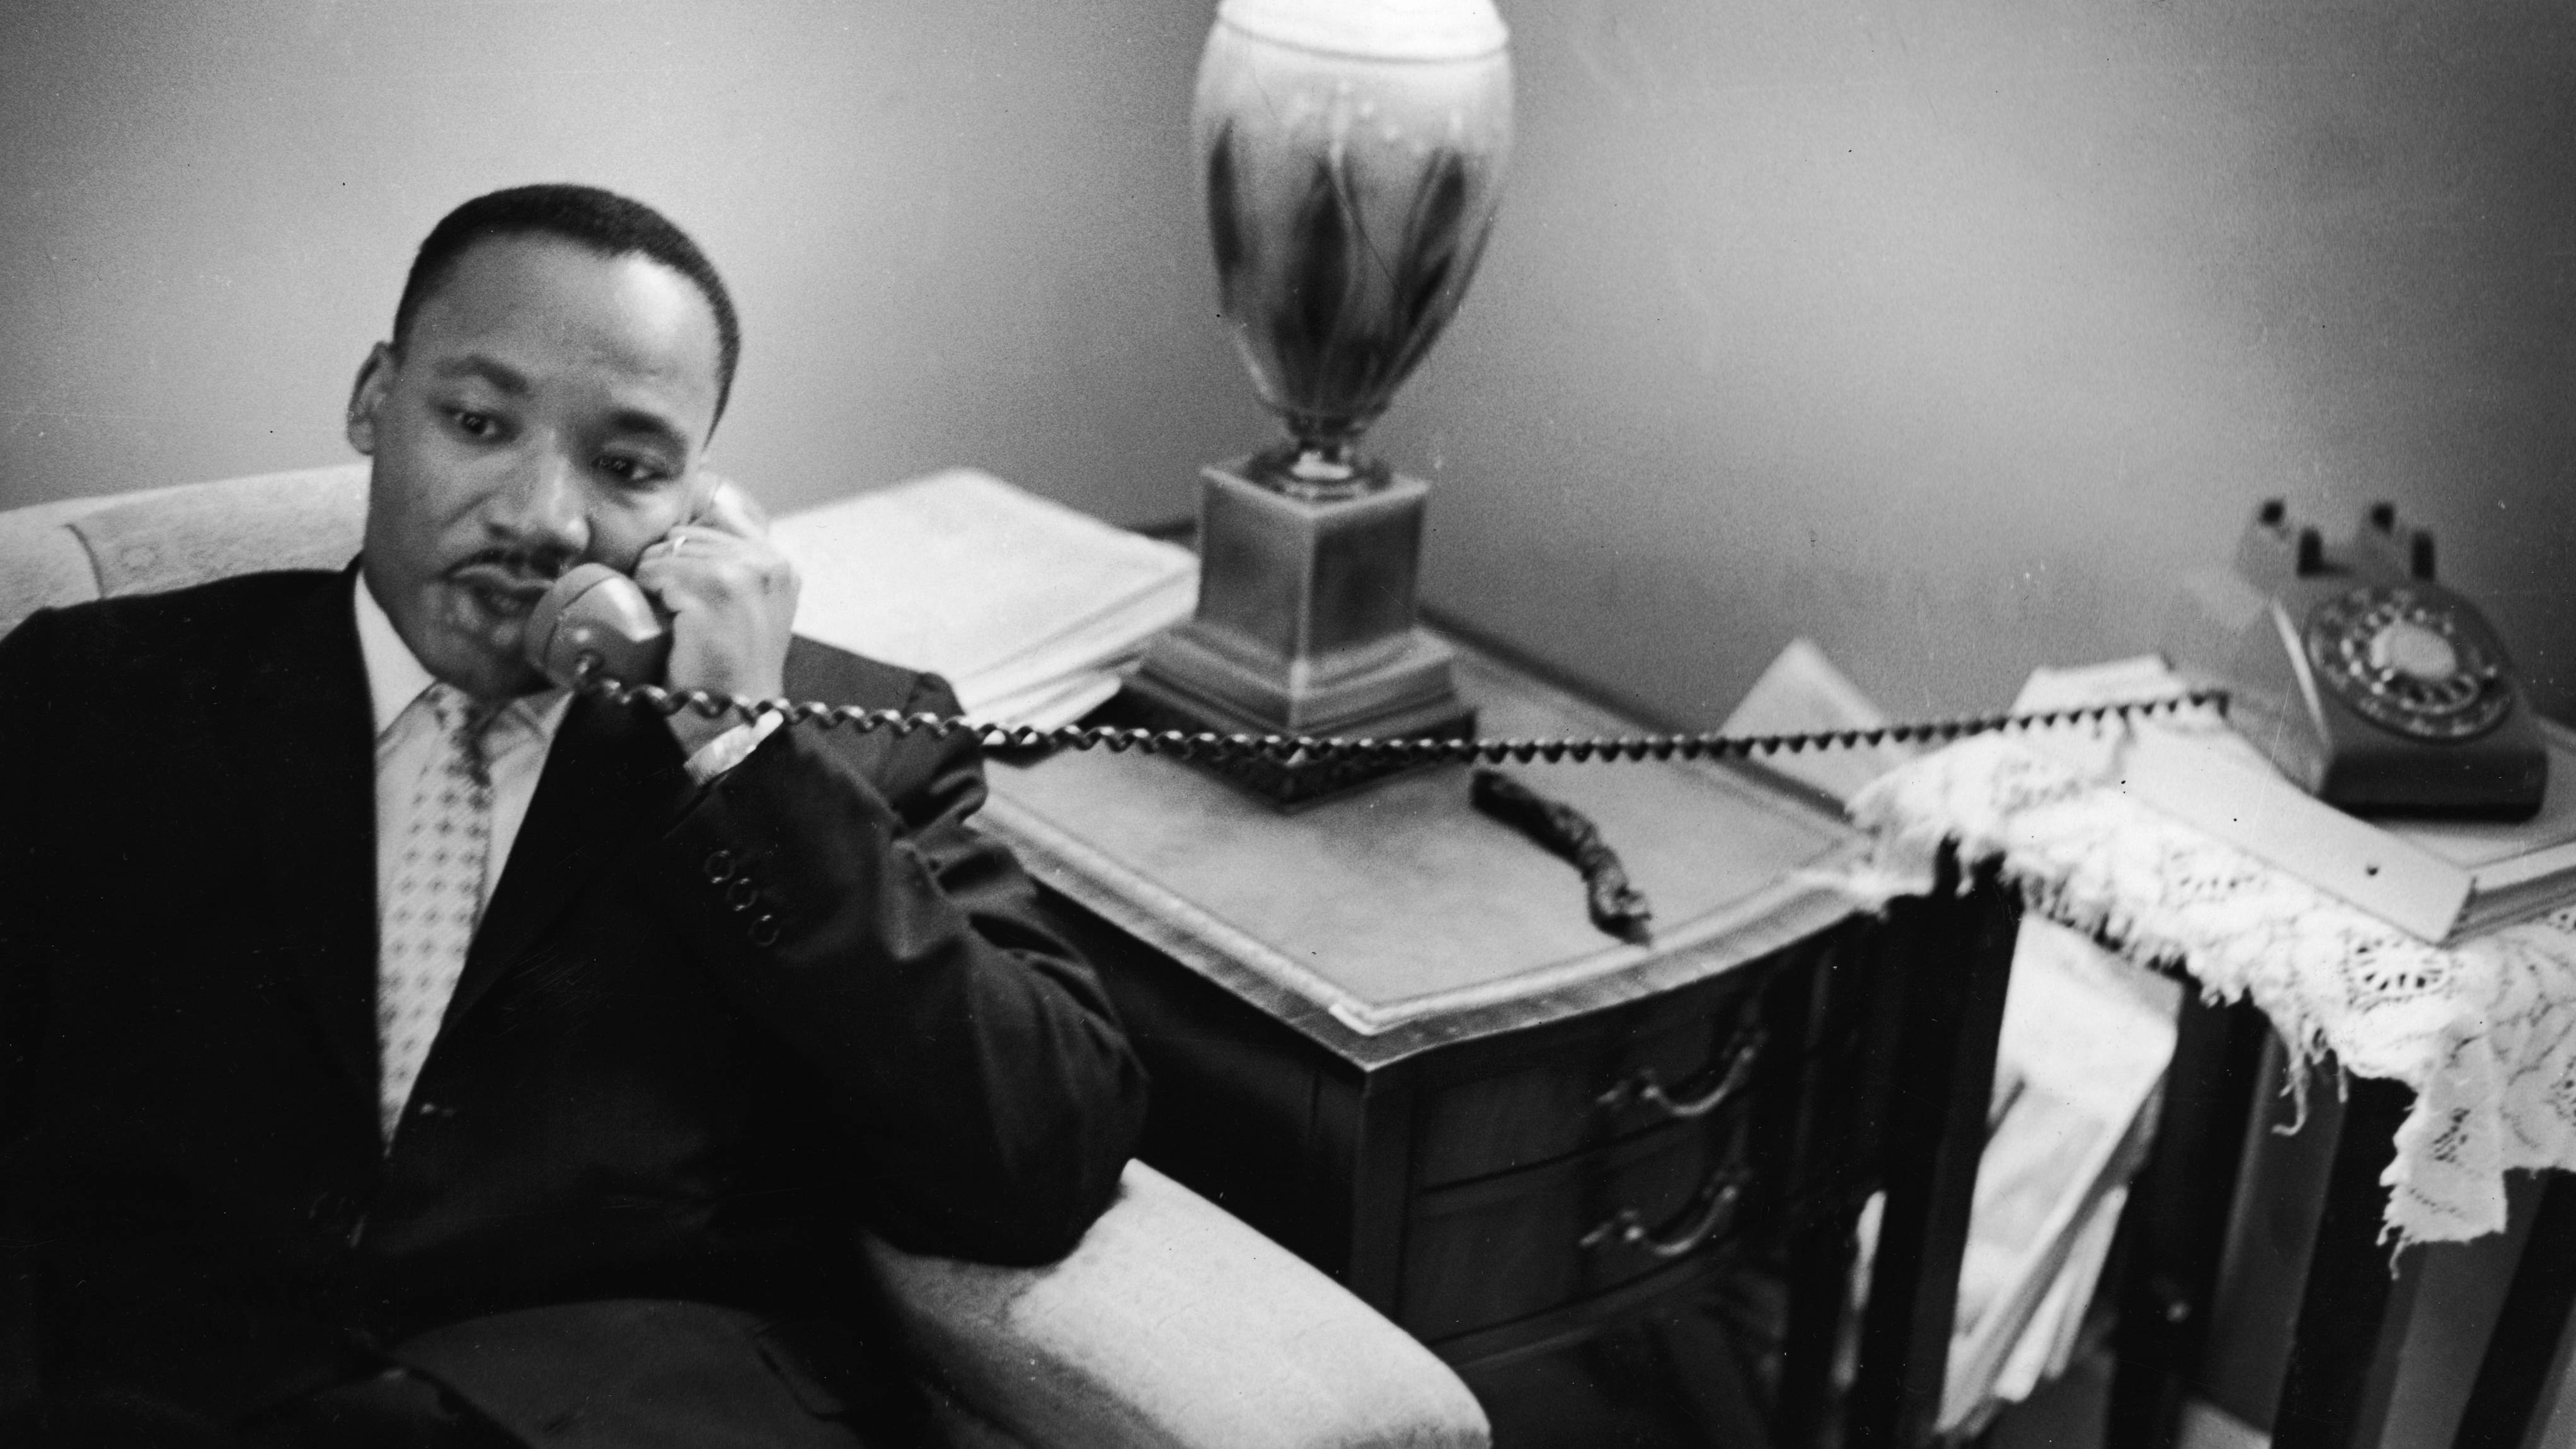 Martin Luther King Jr.'s life in pictures 